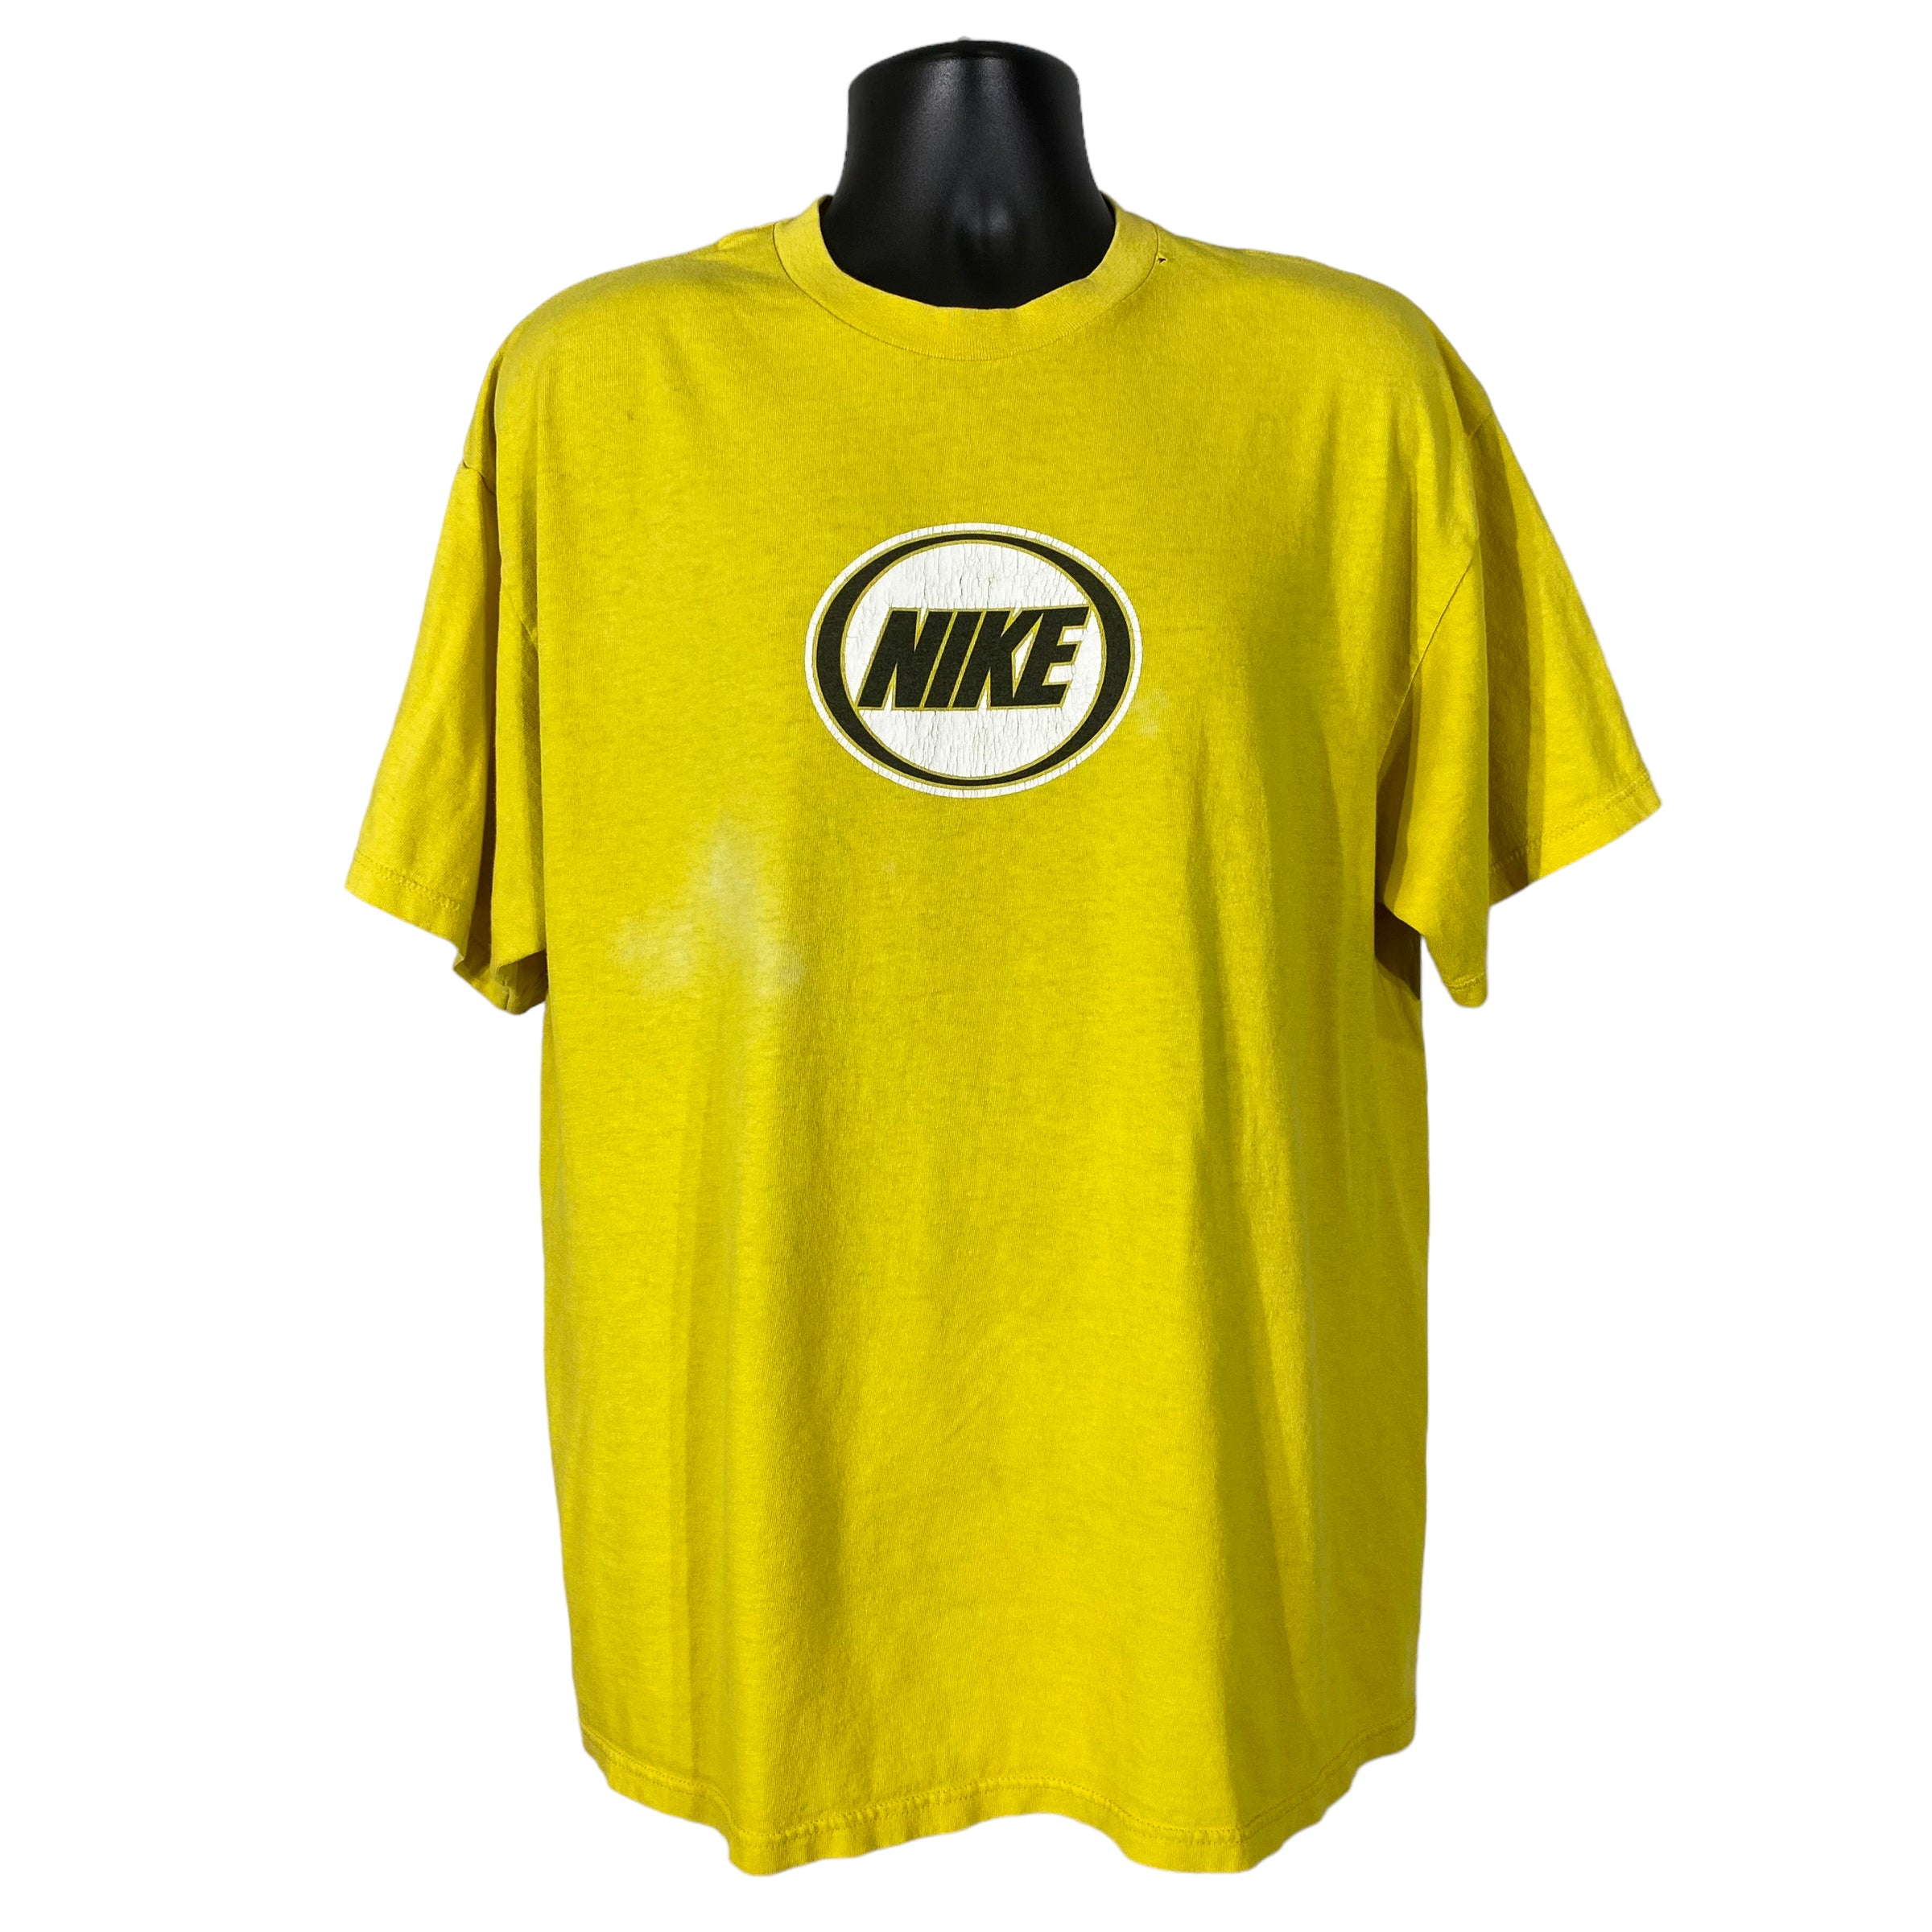 Vintage Nike Center Logo Tee Early 2000s